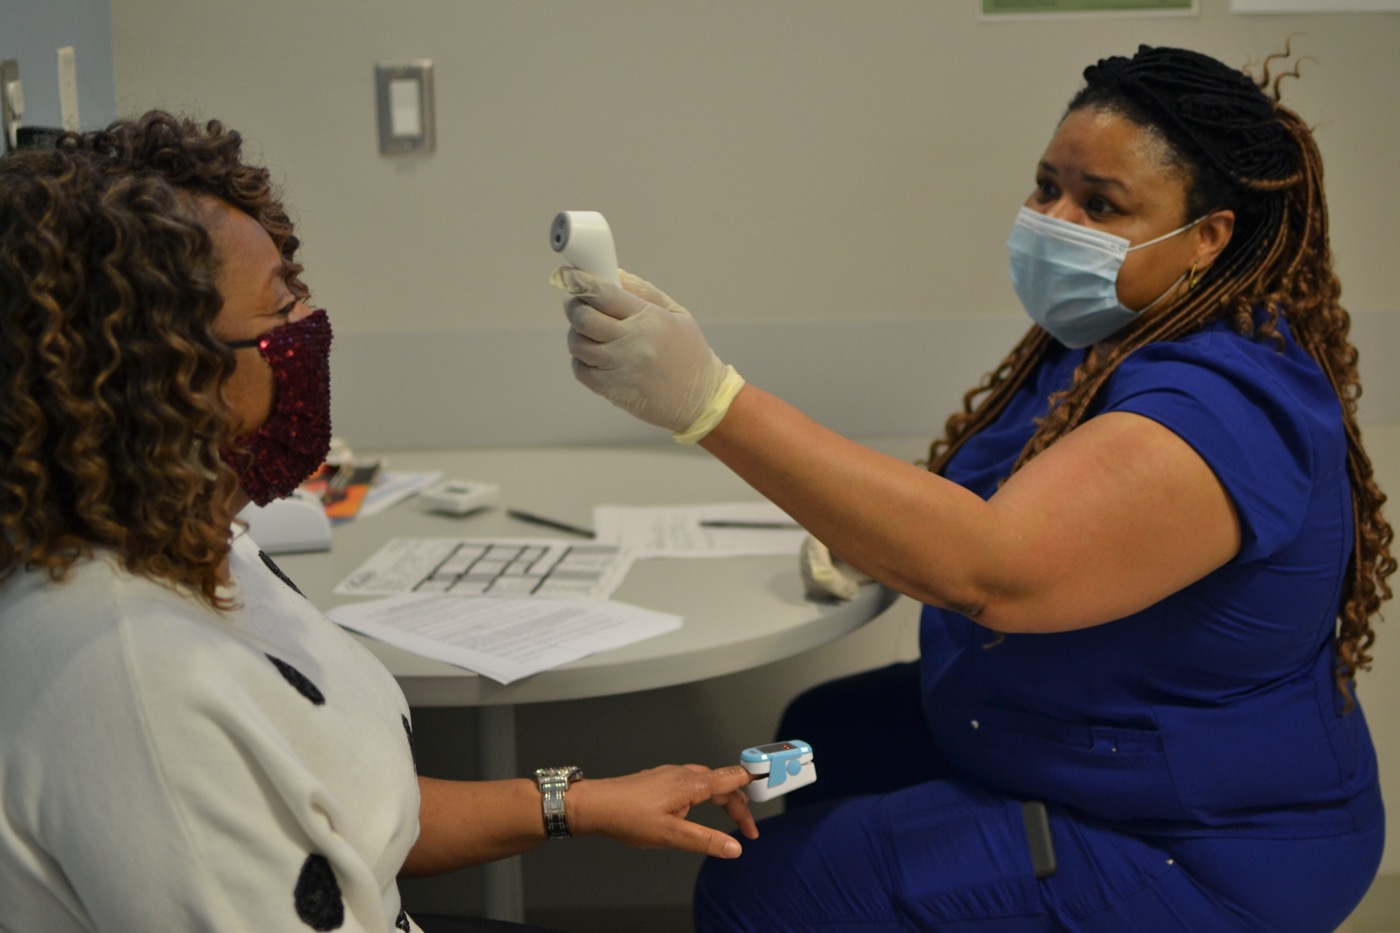 a black woman wearing scrubs and a mask, takes the temperature of another black woman, also wearing a mask